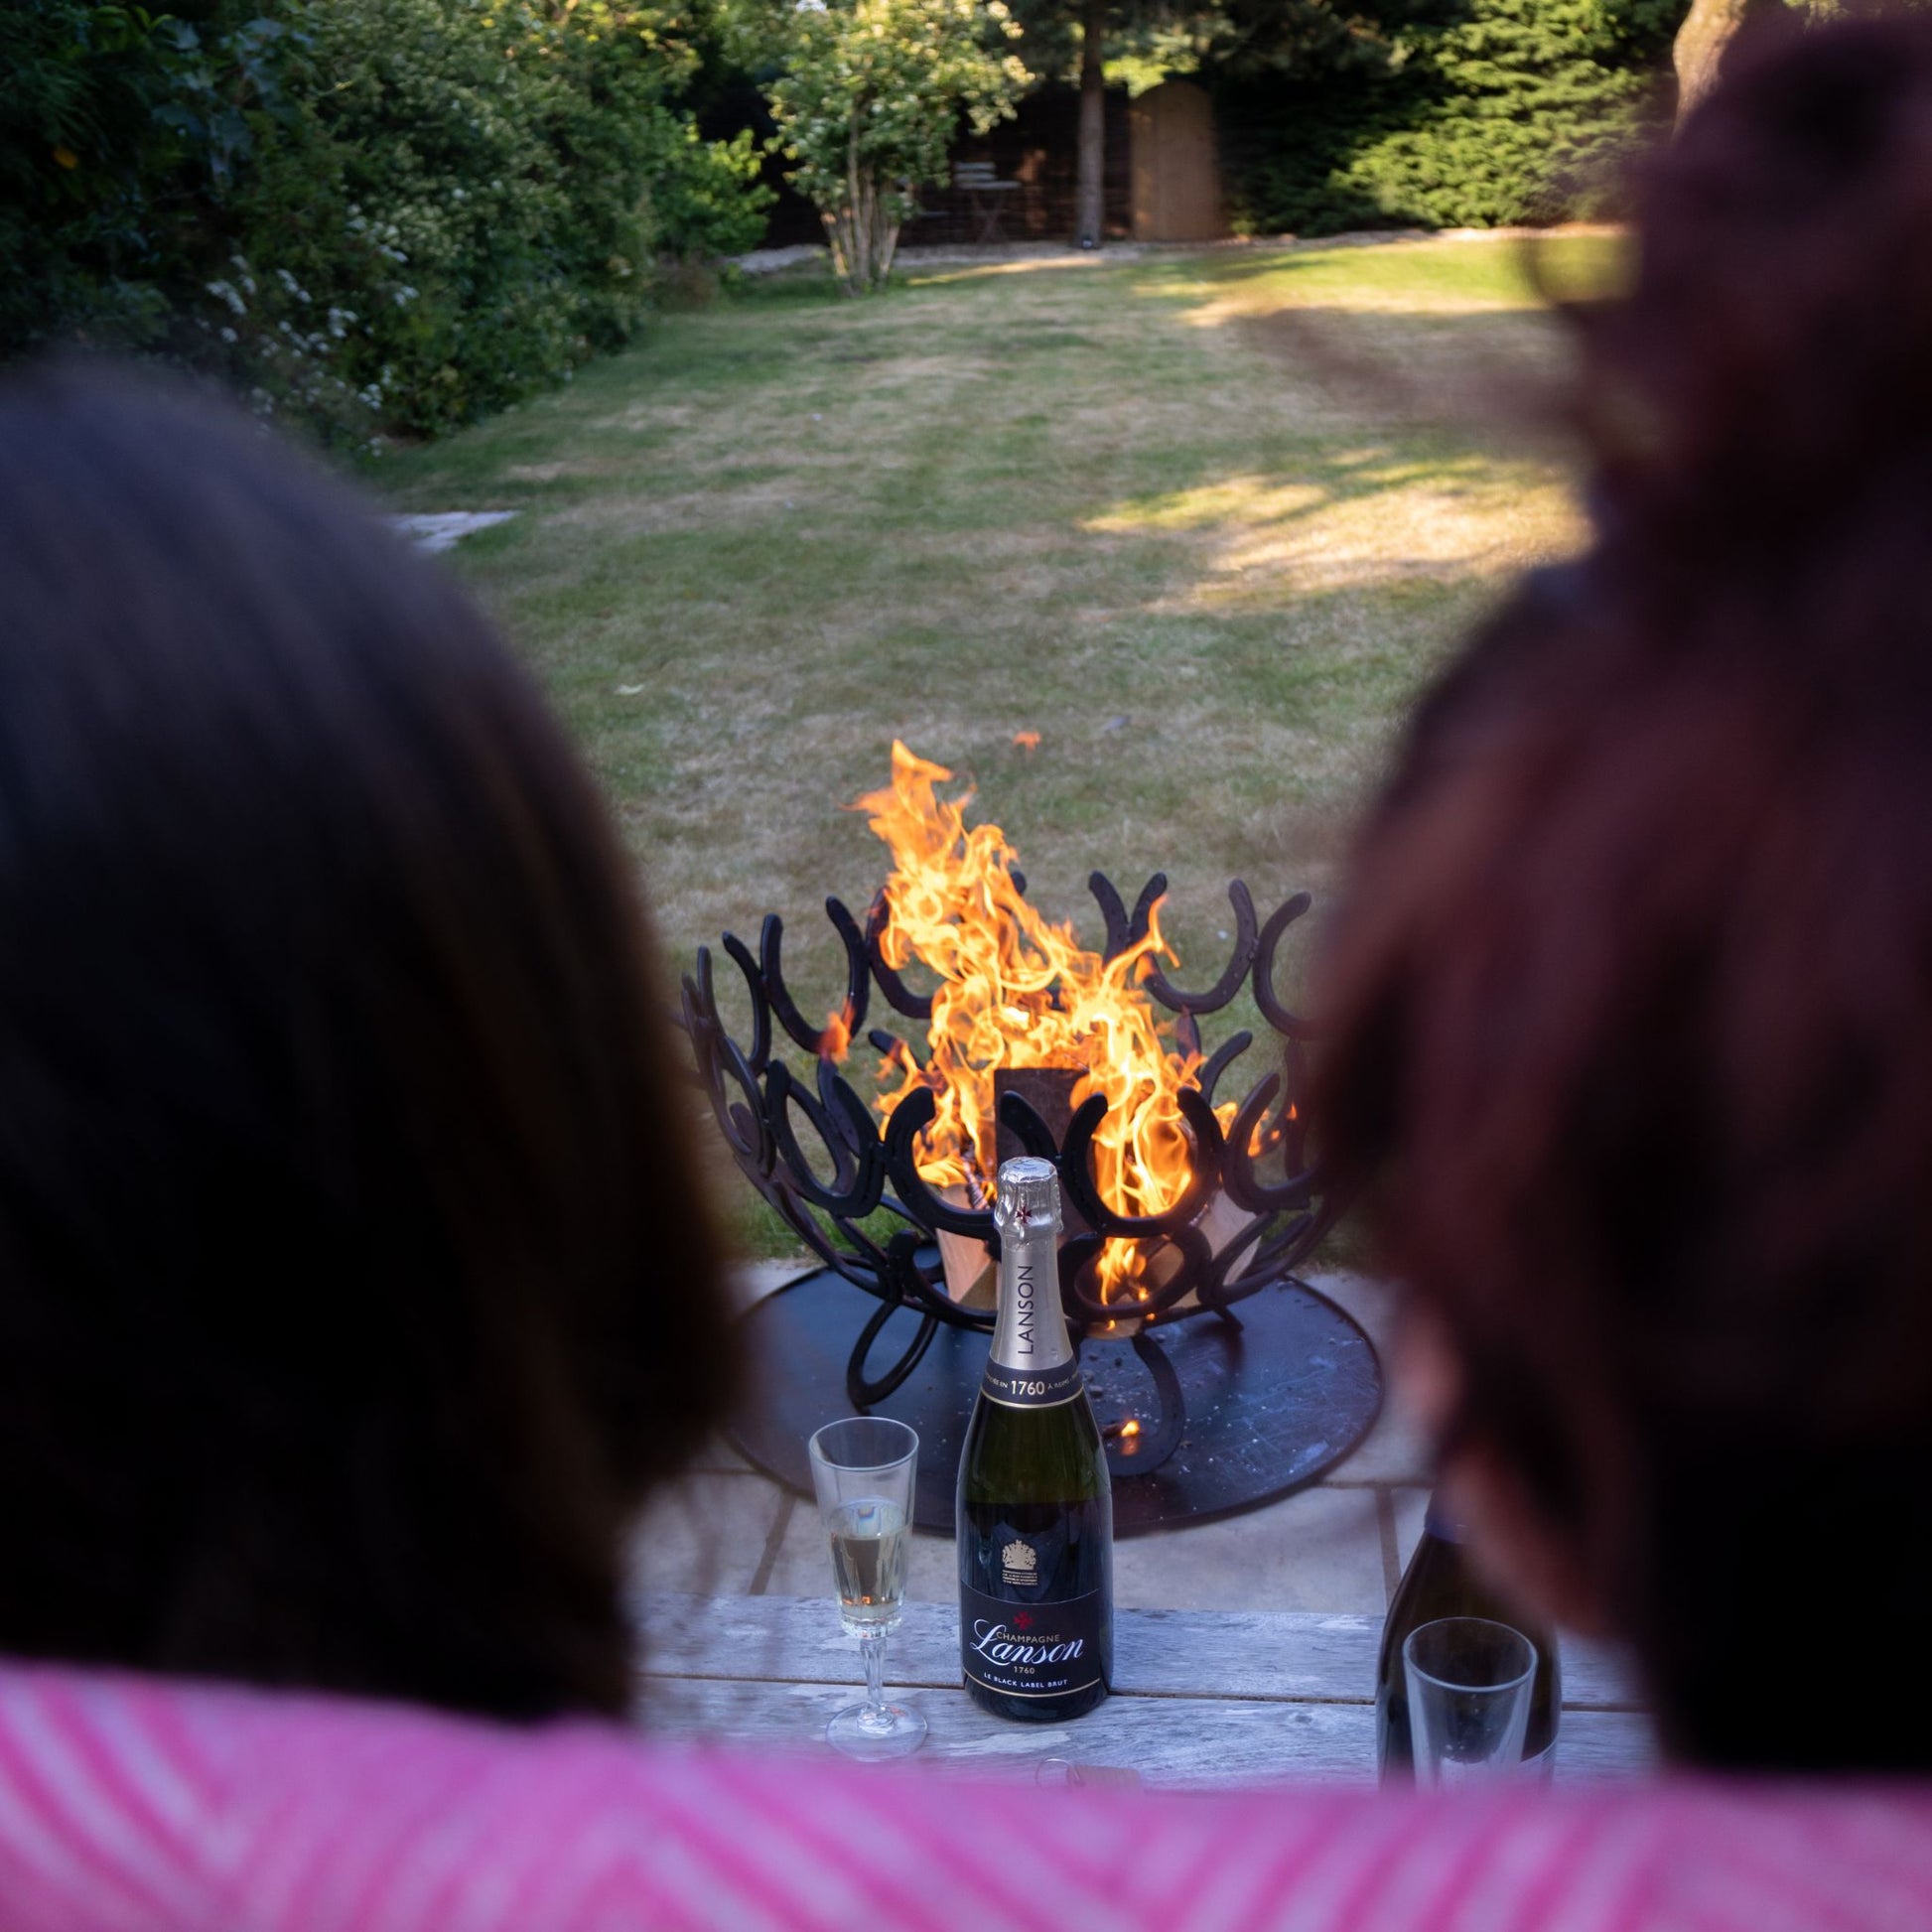 Two women sat in front of a fire in a handmade horseshoe fire pit on a patio in a country garden.